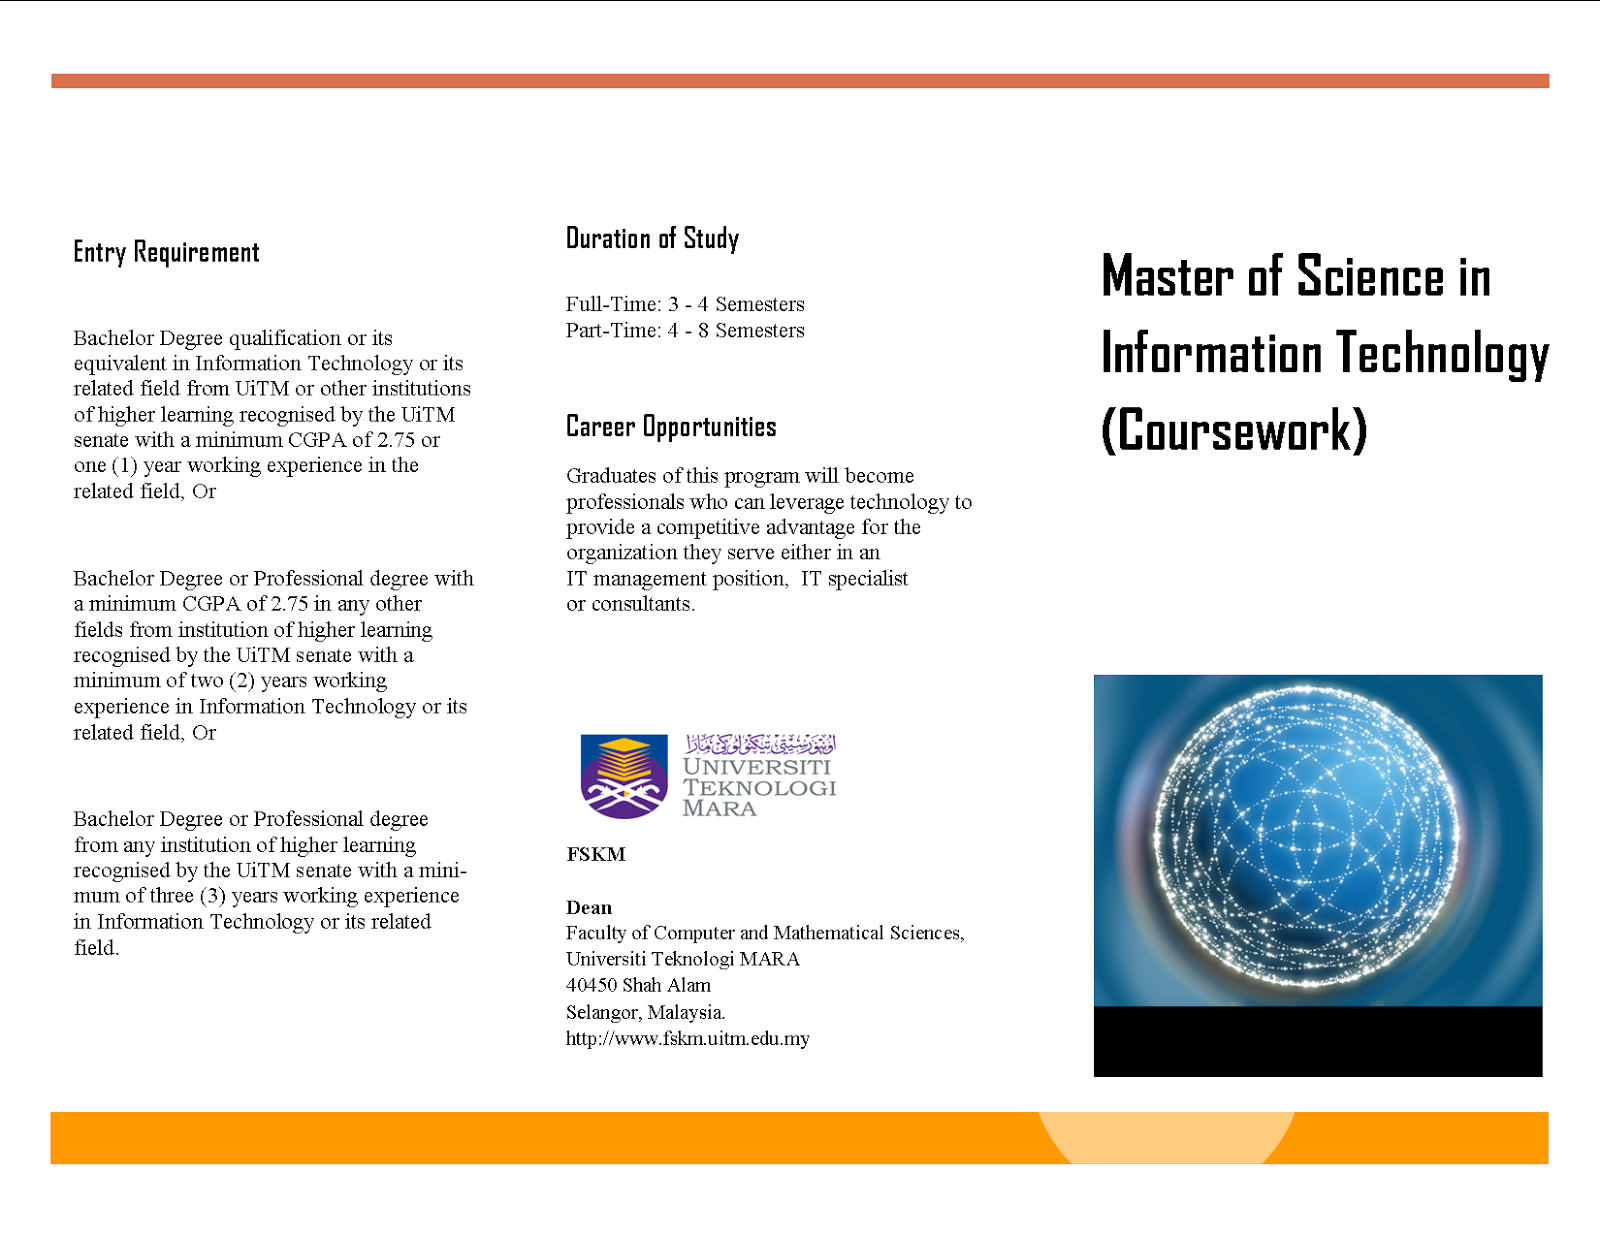 Master of Science in Information Technology (Coursework)